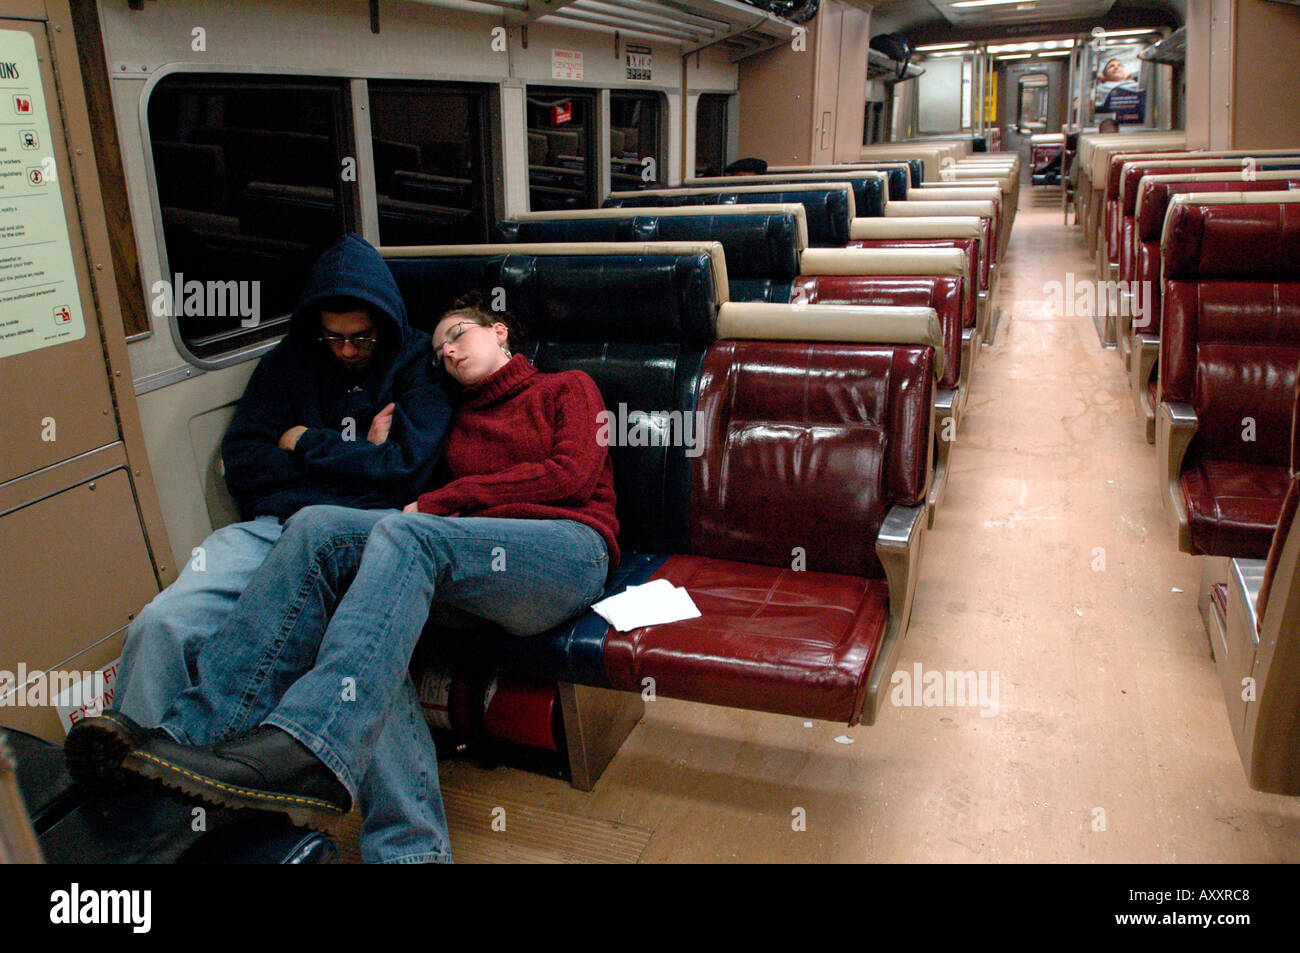 Letzte MetroNorth s-Bahn am 1 50 AM Grand Central Station, New Haven Conn Stockfoto